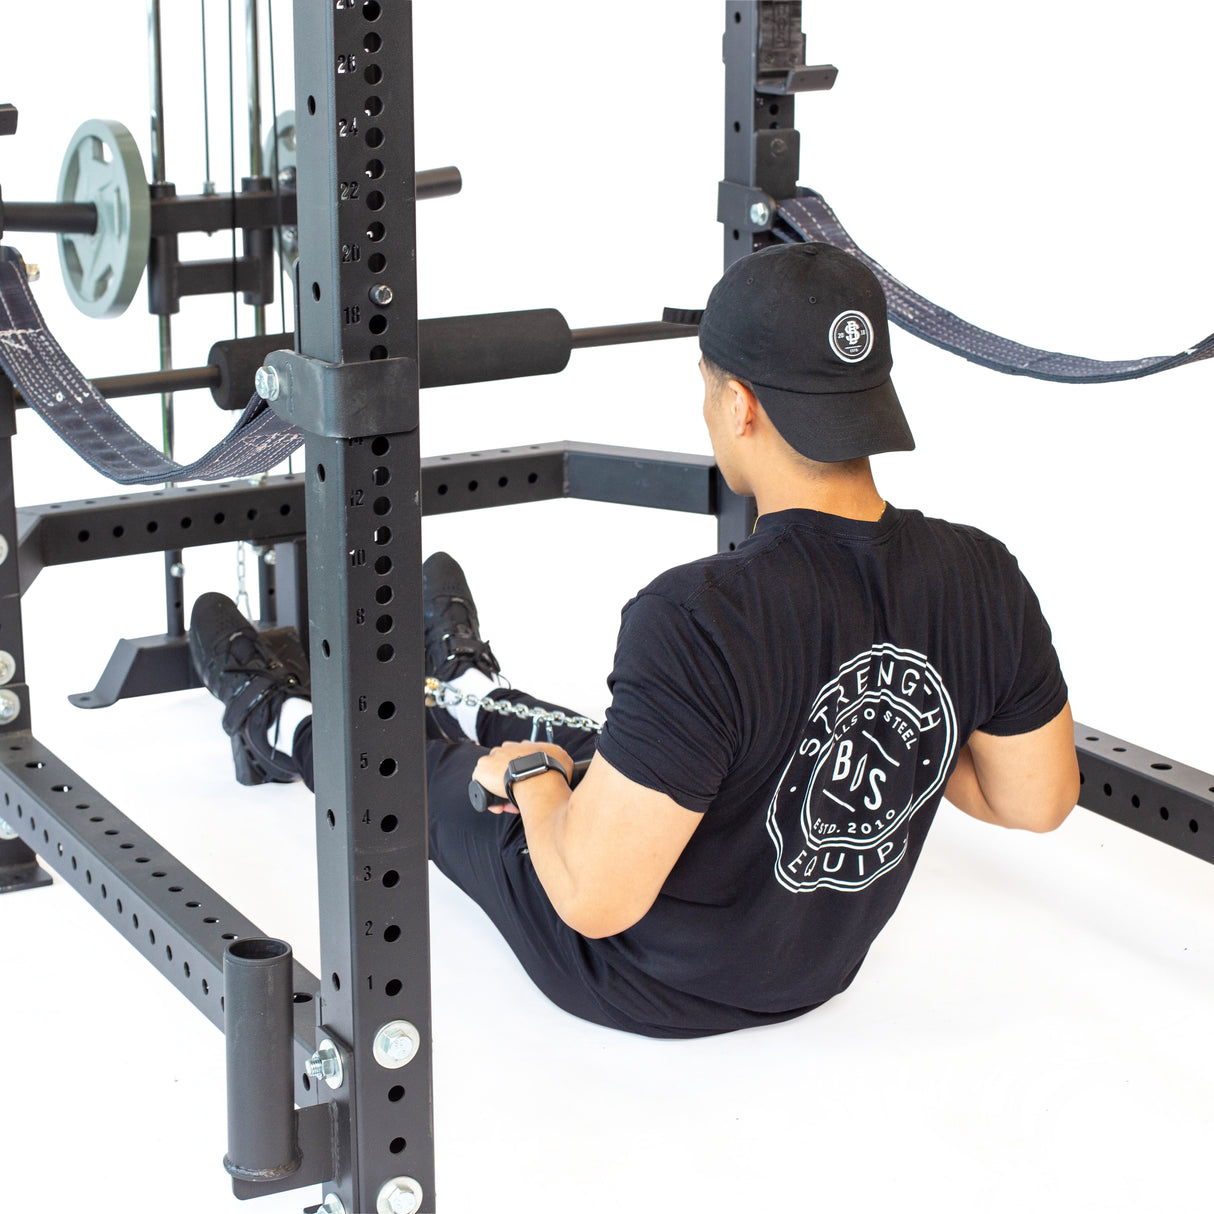 Male athlete doing seated row exercise using Plate-Loaded Lat Pulldown & Low Row Rack Attachment - Hydra